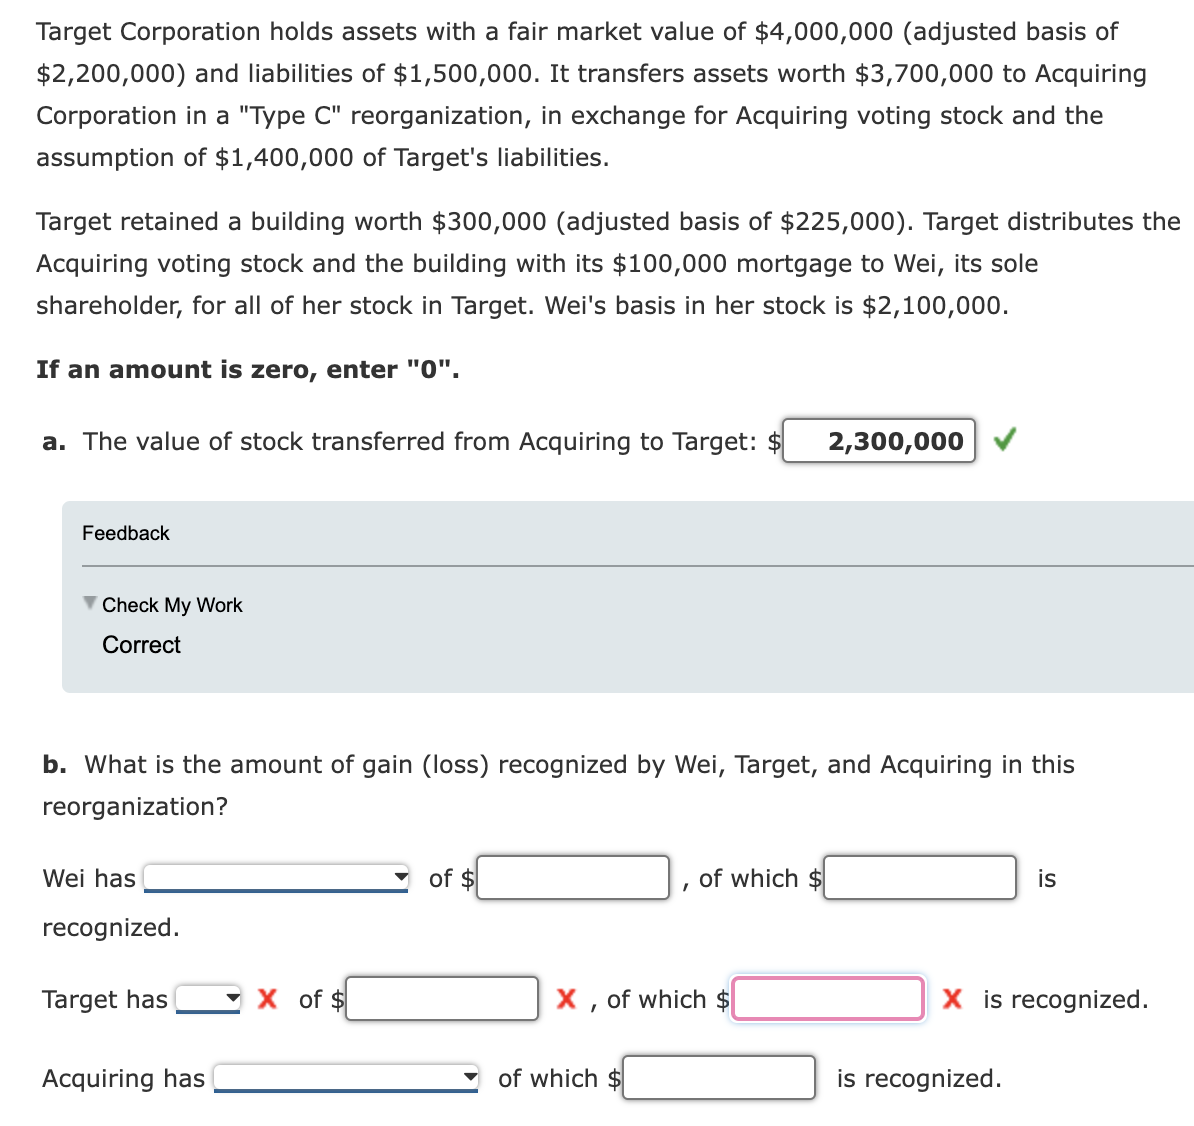 Target Corporation holds assets with a fair market value of $4,000,000 (adjusted basis of
$2,200,000) and liabilities of $1,500,000. It transfers assets worth $3,700,000 to Acquiring
Corporation in a "Type C" reorganization, in exchange for Acquiring voting stock and the
assumption of $1,400,000 of Target's liabilities.
Target retained a building worth $300,000 (adjusted basis of $225,000). Target distributes the
Acquiring voting stock and the building with its $100,000 mortgage to Wei, its sole
shareholder, for all of her stock in Target. Wei's basis in her stock is $2,100,000.
If an amount is zero, enter "0".
a. The value of stock transferred from Acquiring to Target:
2,300,000
Feedback
Check My Work
Correct
b. What is the amount of gain (loss) recognized by Wei, Target, and Acquiring in this
reorganization?
Wei has
recognized.
of $
of which $
is
X, of which $
X is recognized.
is recognized.
Target has
of $
Acquiring has
of which $